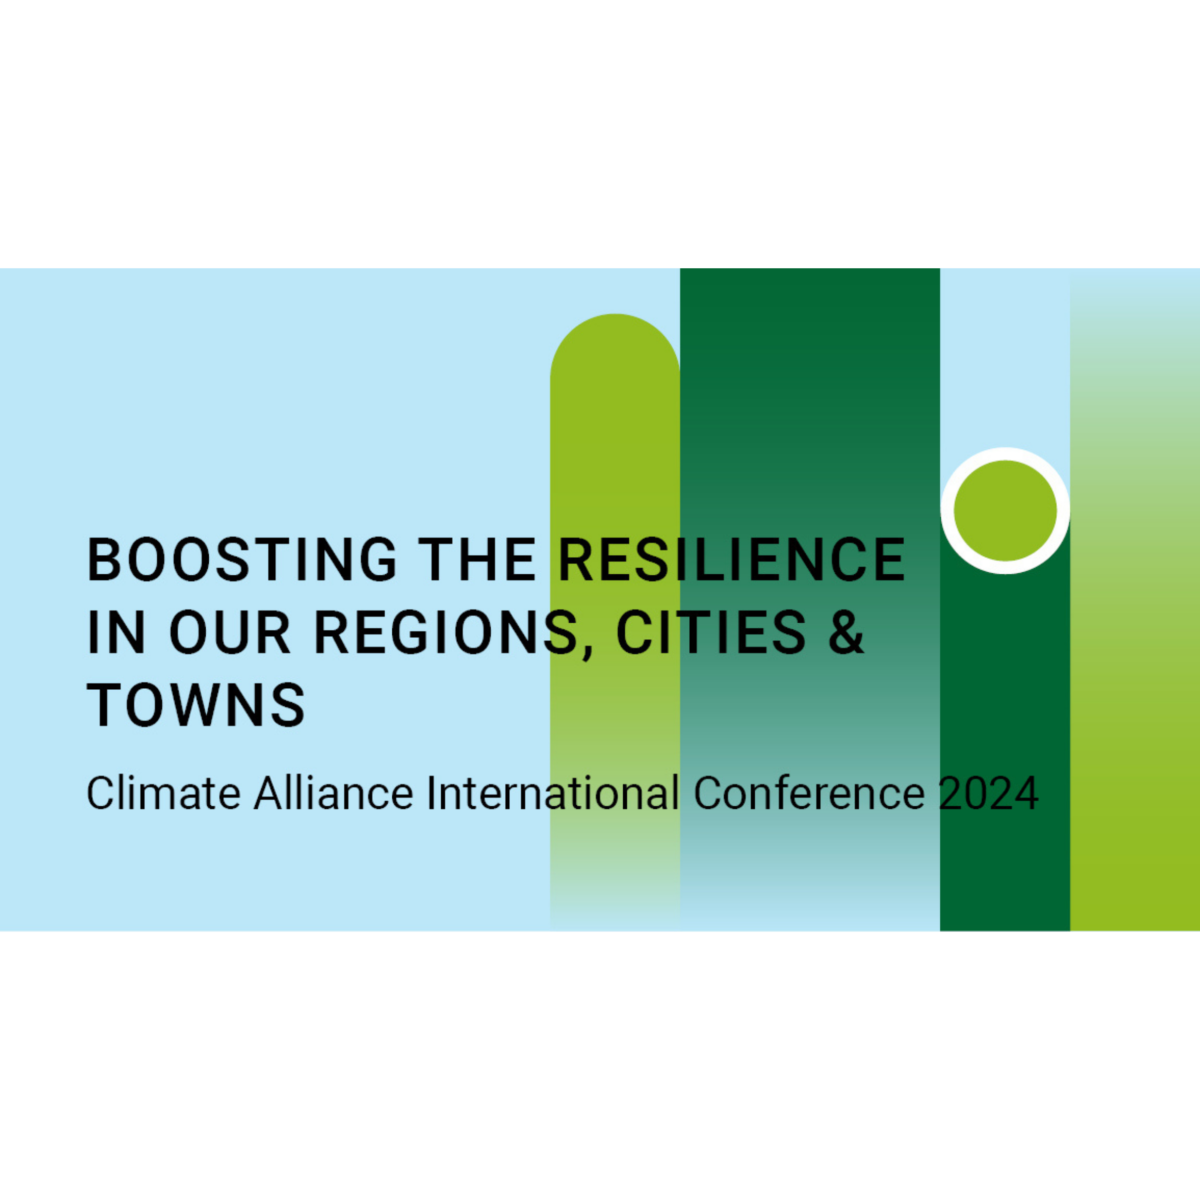 Boosting the resilience in our regions, cities & towns